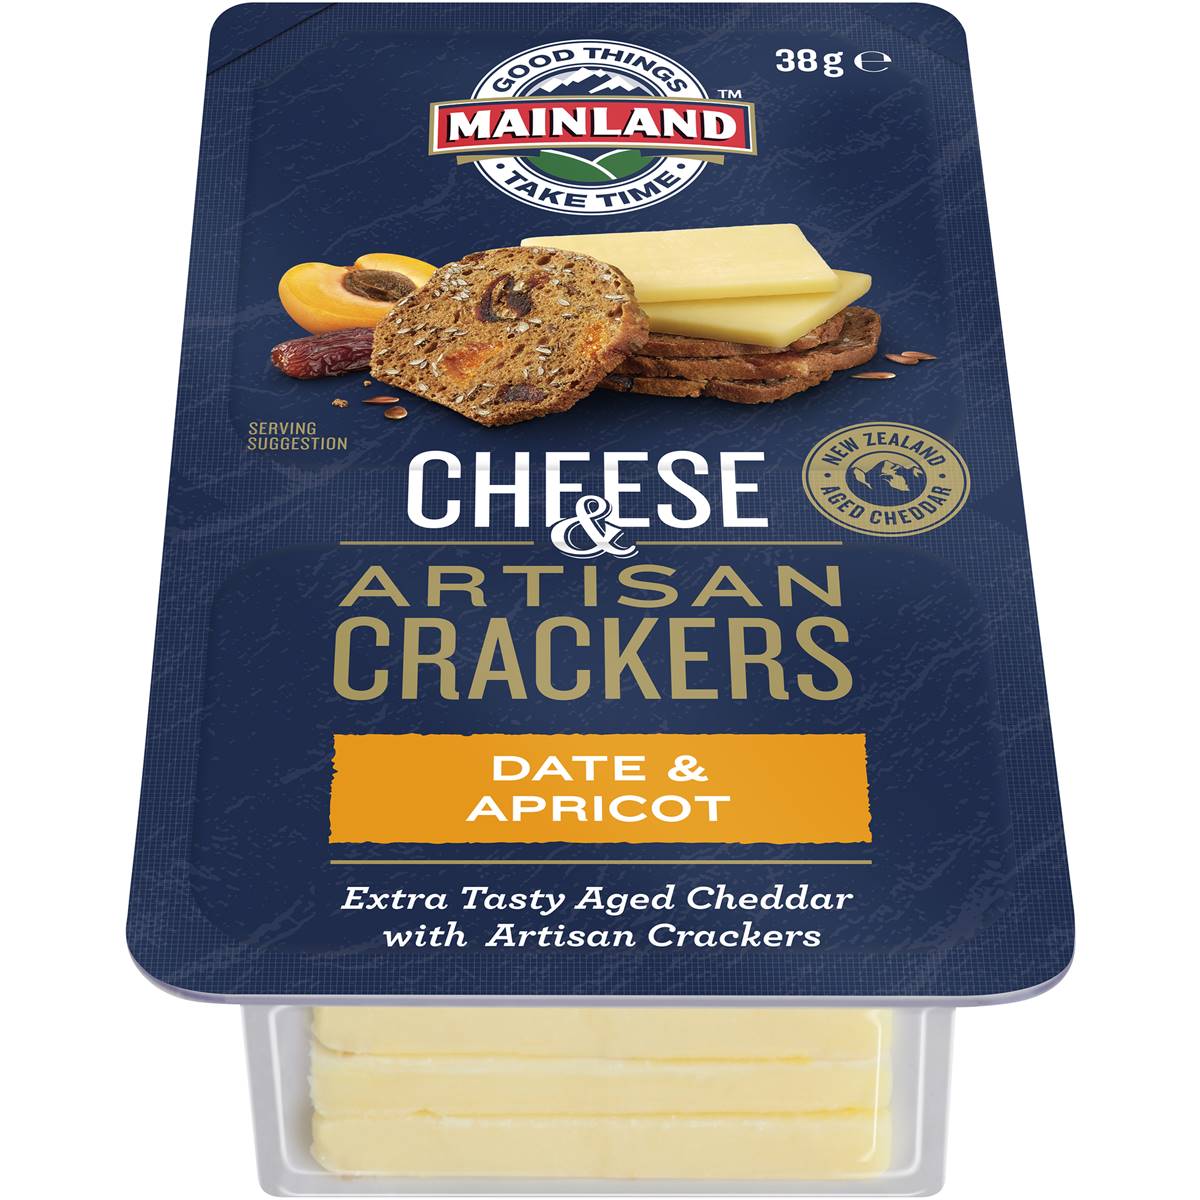 Calories in Mainland Otg Extra Tasty Artisan Cheese & Crackers